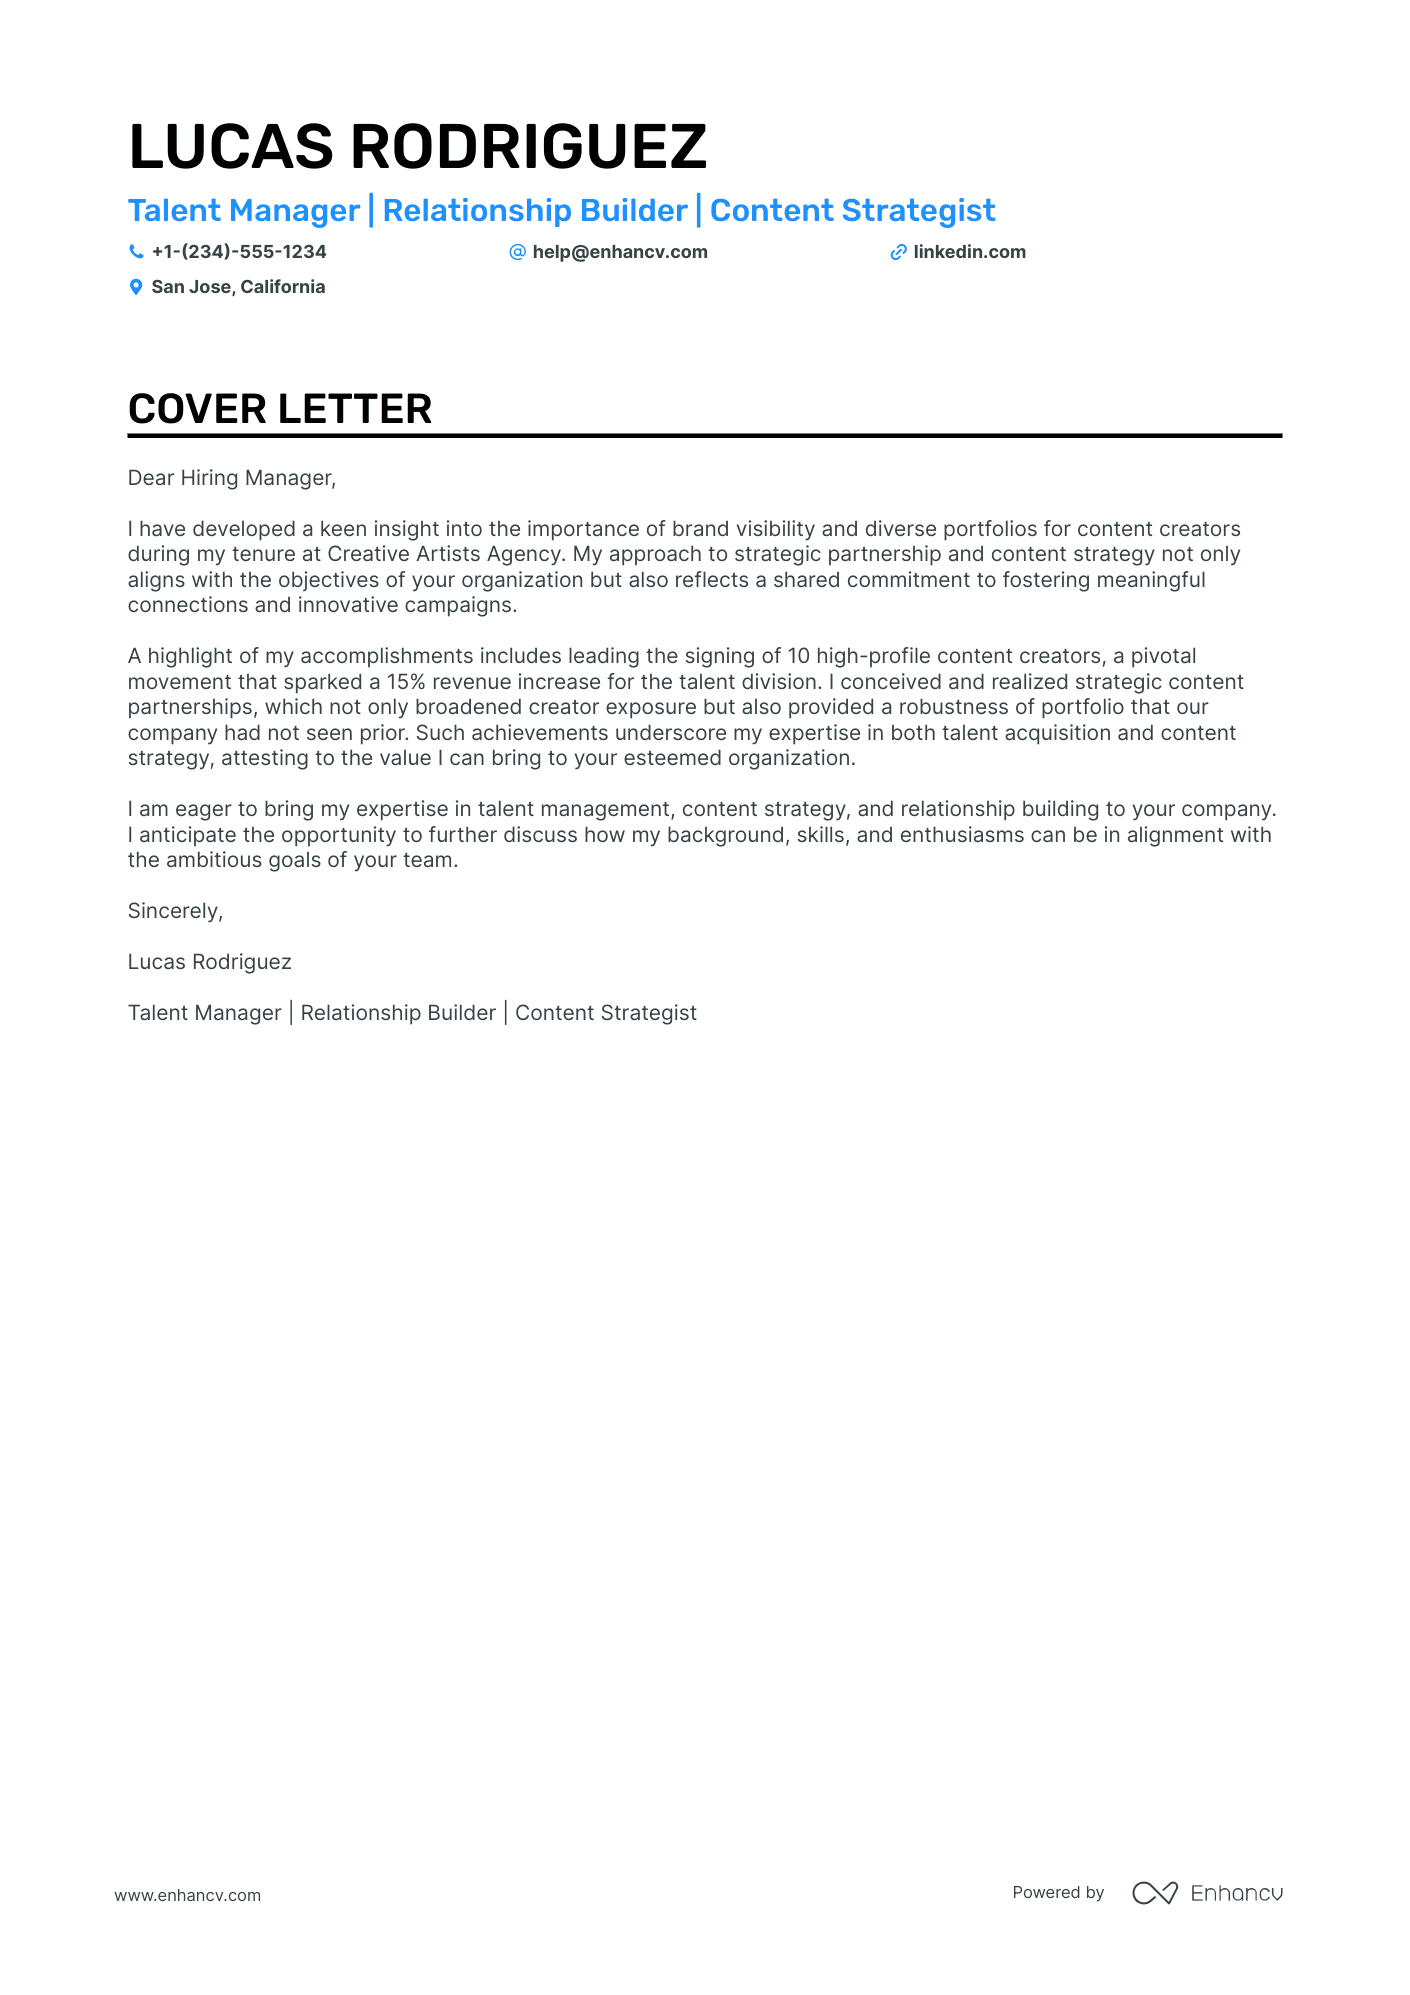 Talent Manager cover letter